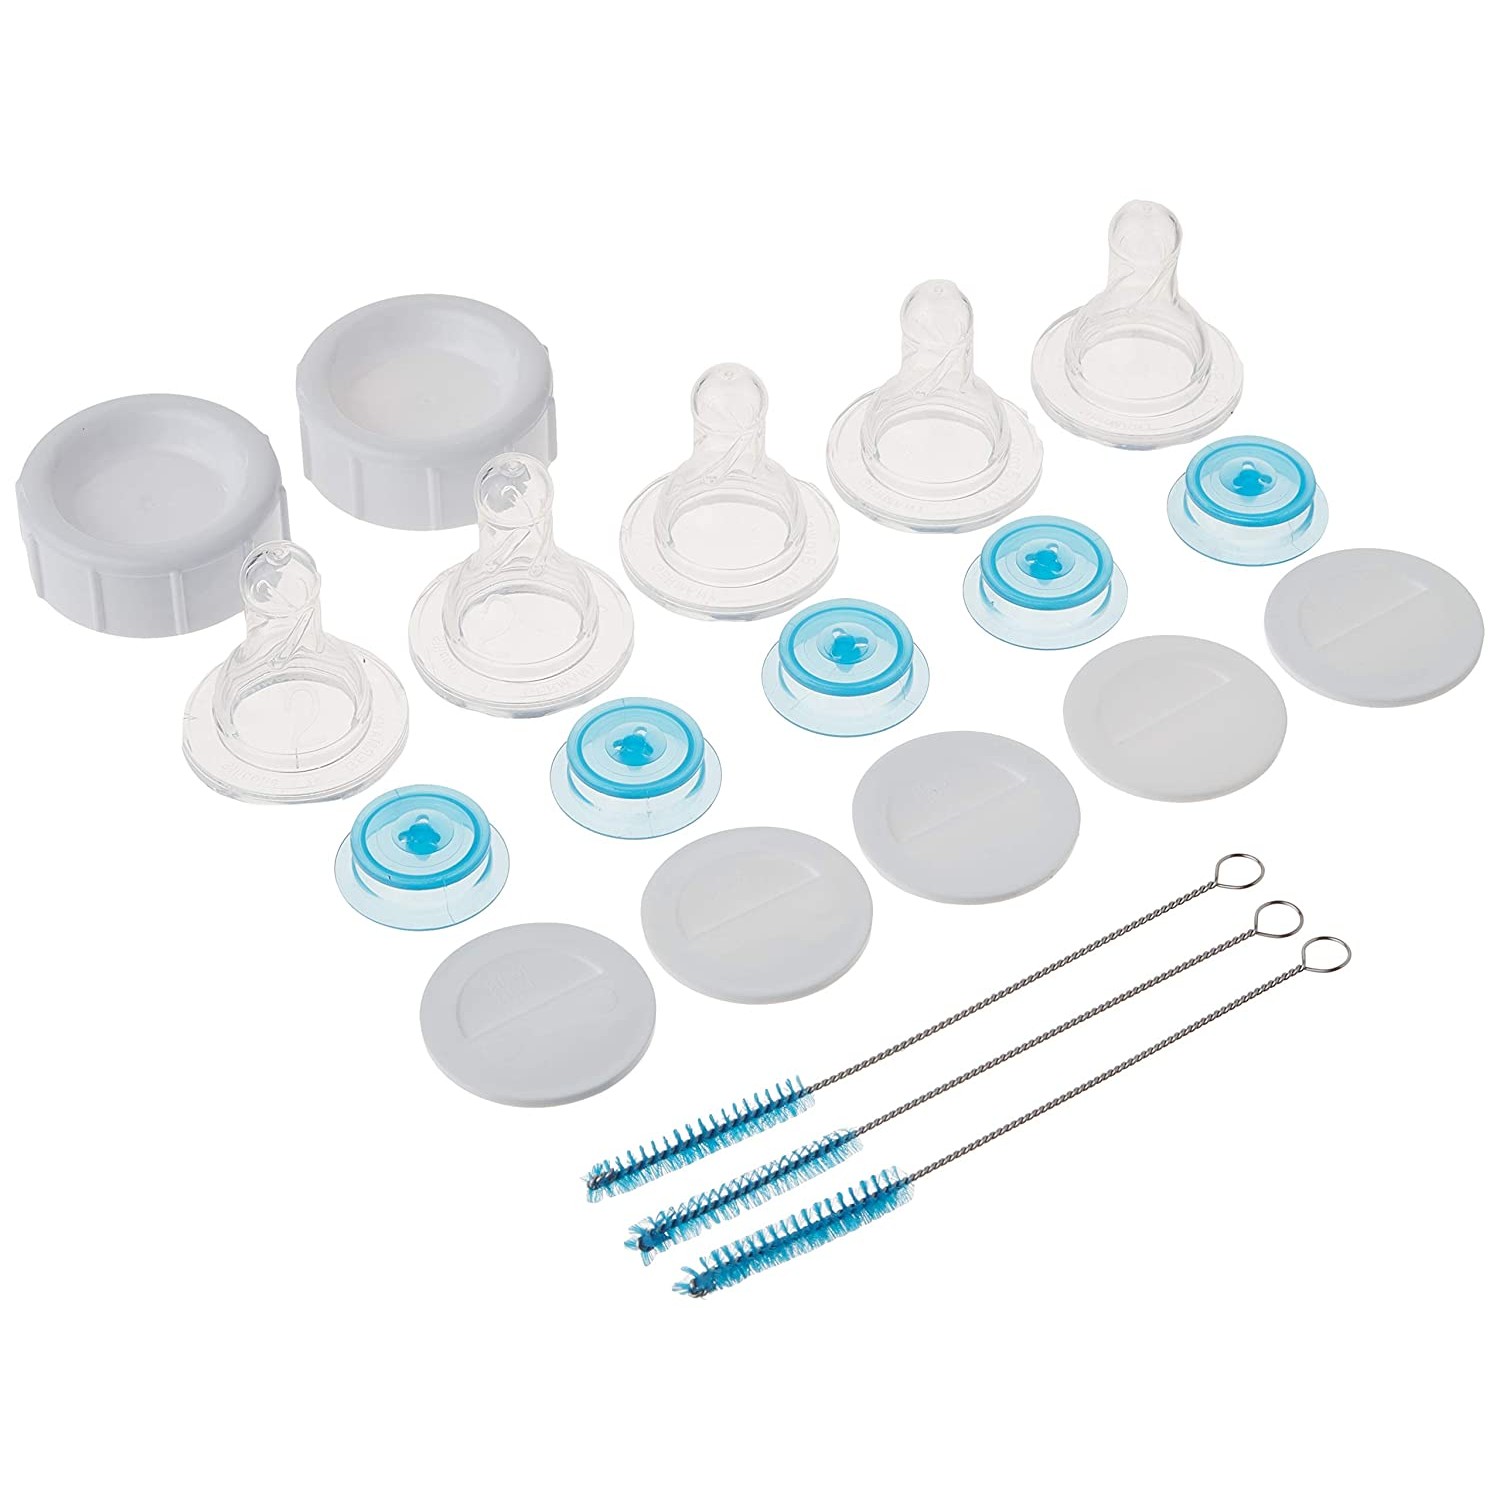 Dr. Brown's Specialty Feeding System - How to Assemble 